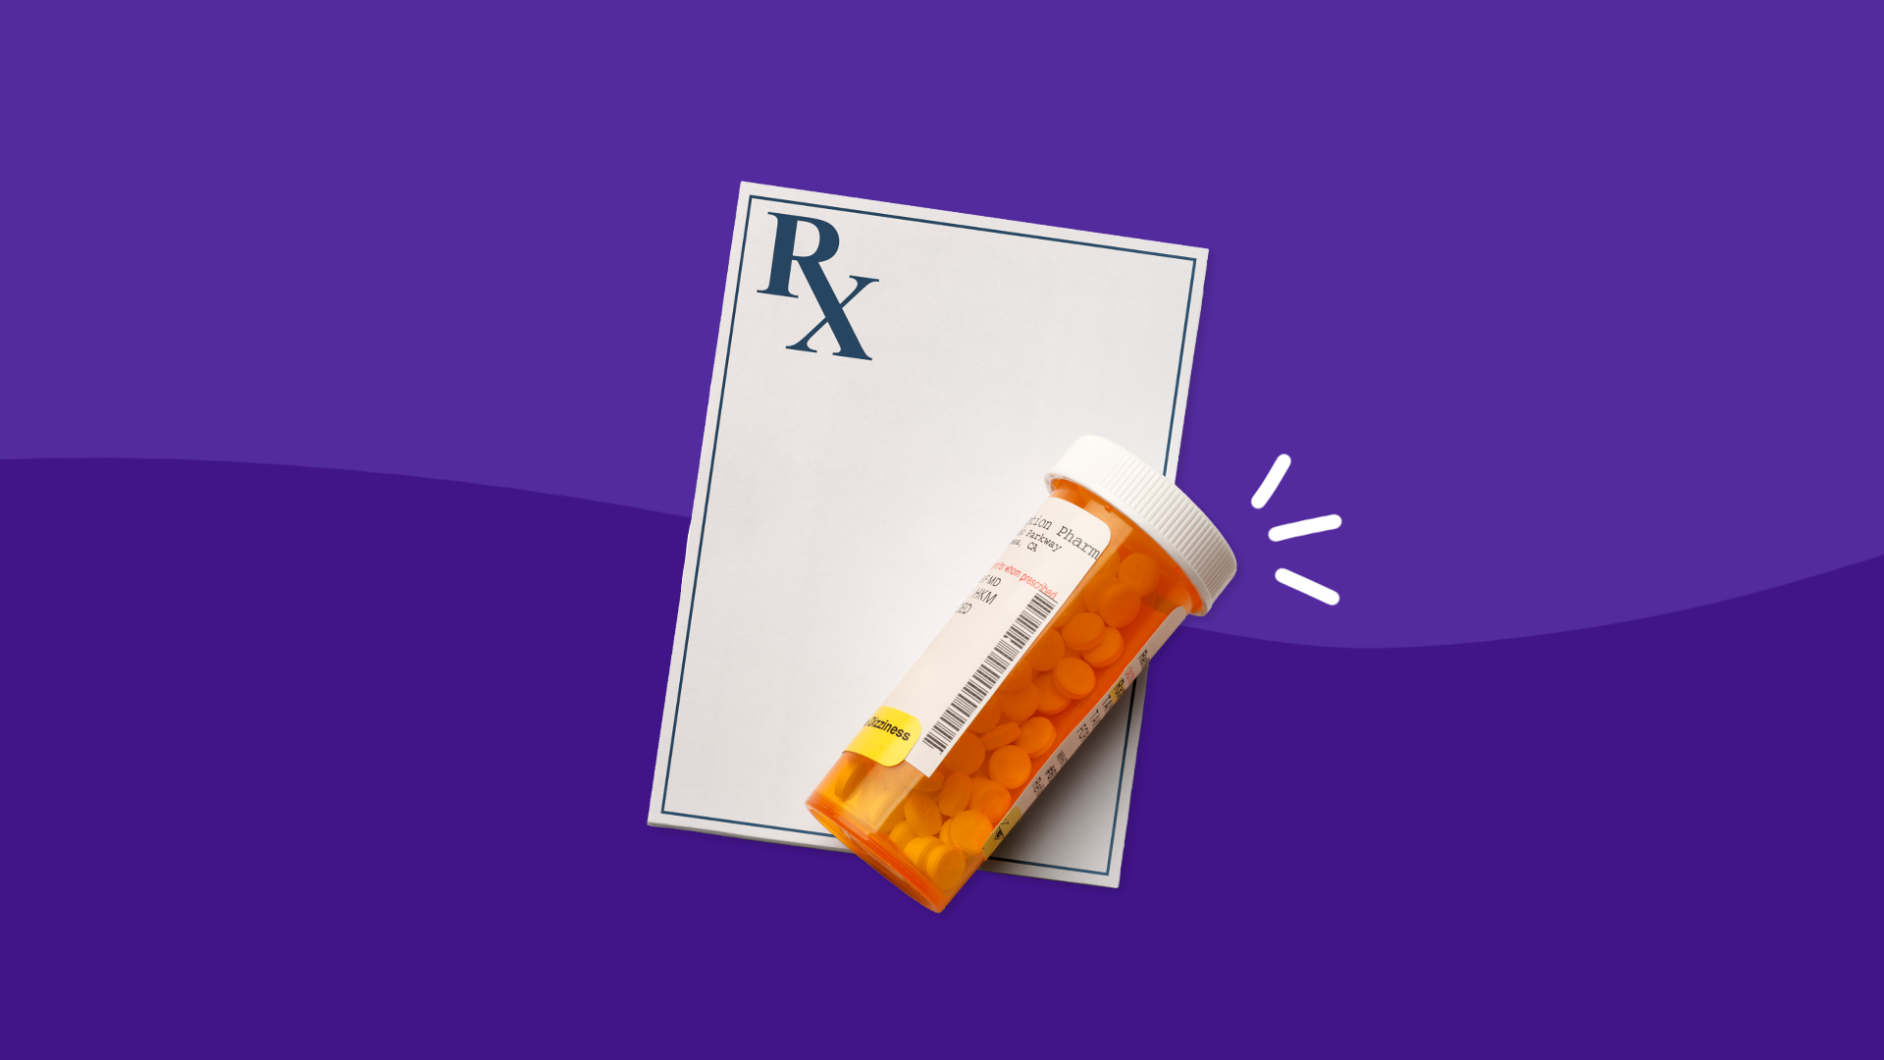 Prescription pad with pill bottle: Common vs. serious Lyrica side effects